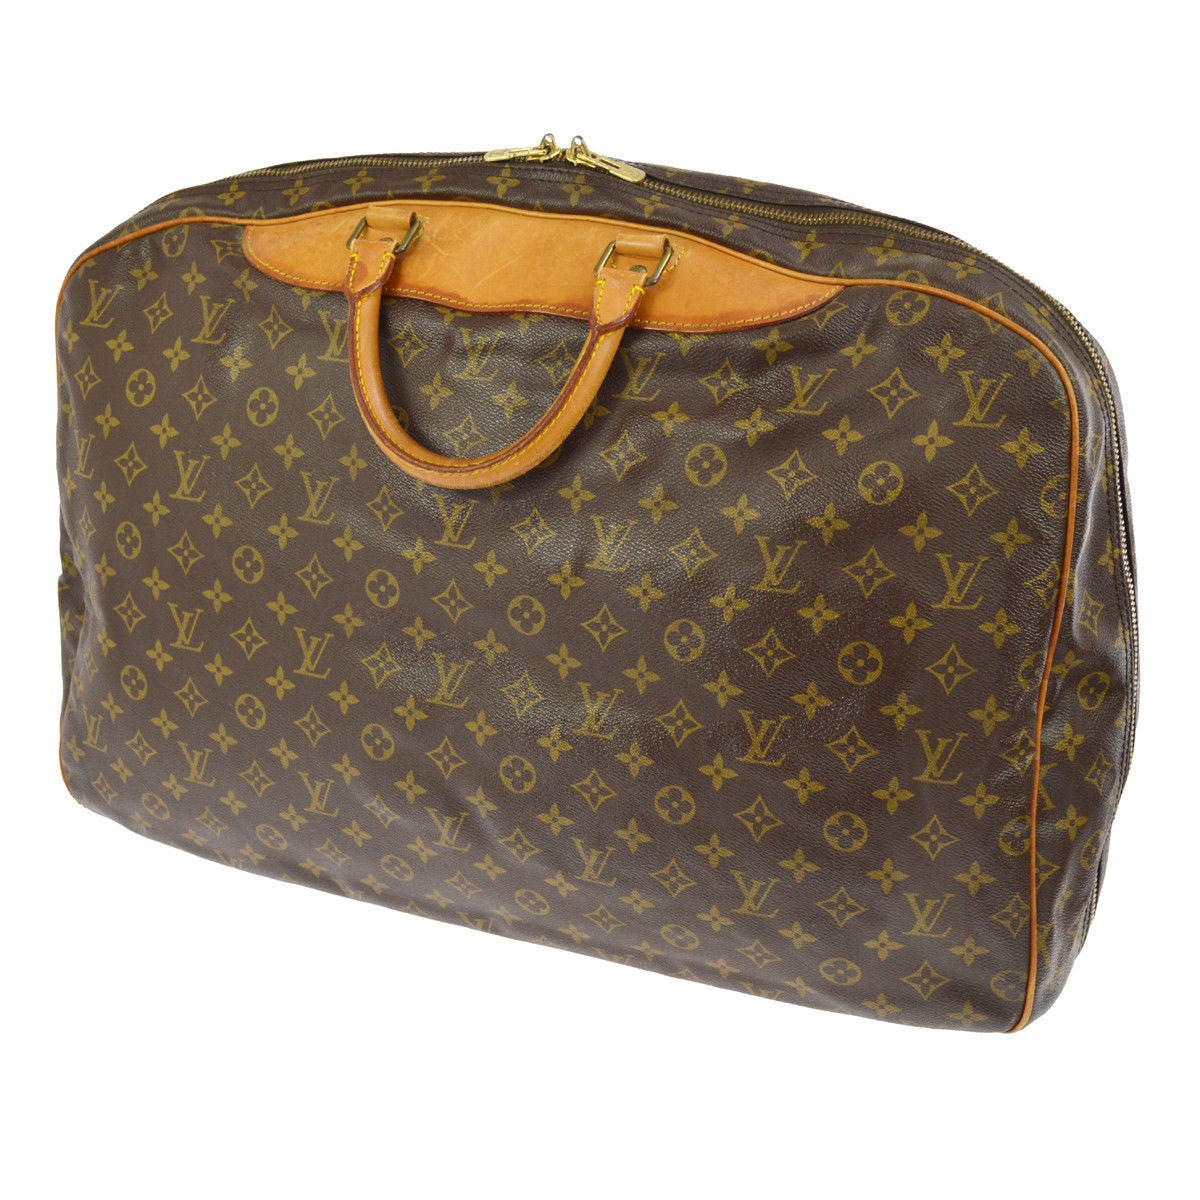 Louis Vuitton In Macy  Natural Resource Department